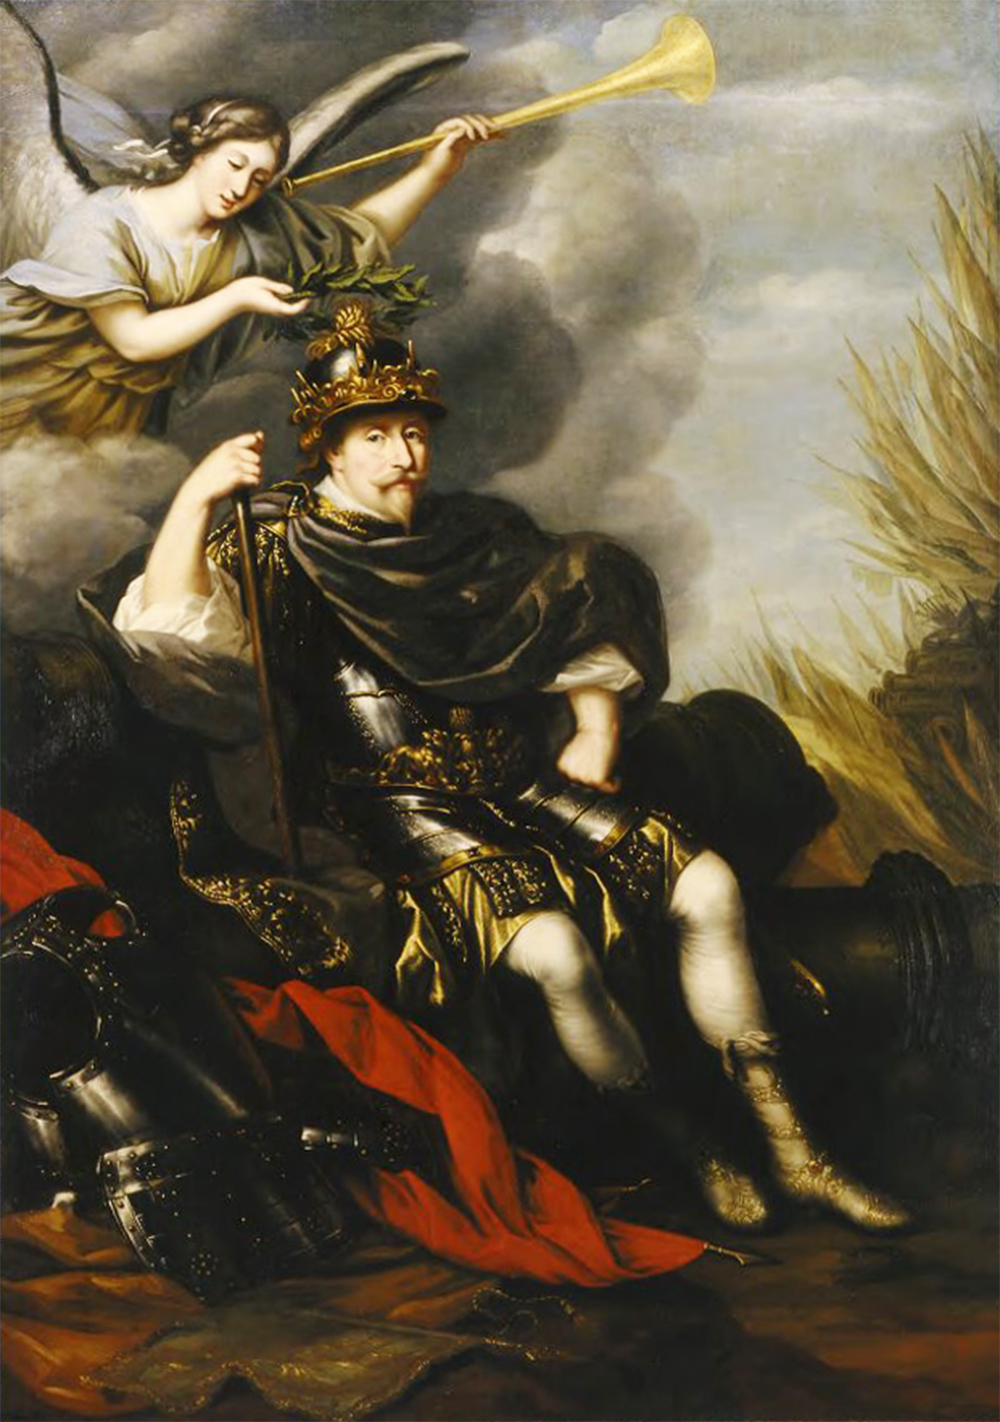 A painting of an angel blowing a trumpet and king Gustav II Adolf in armor under a cloudy sky.